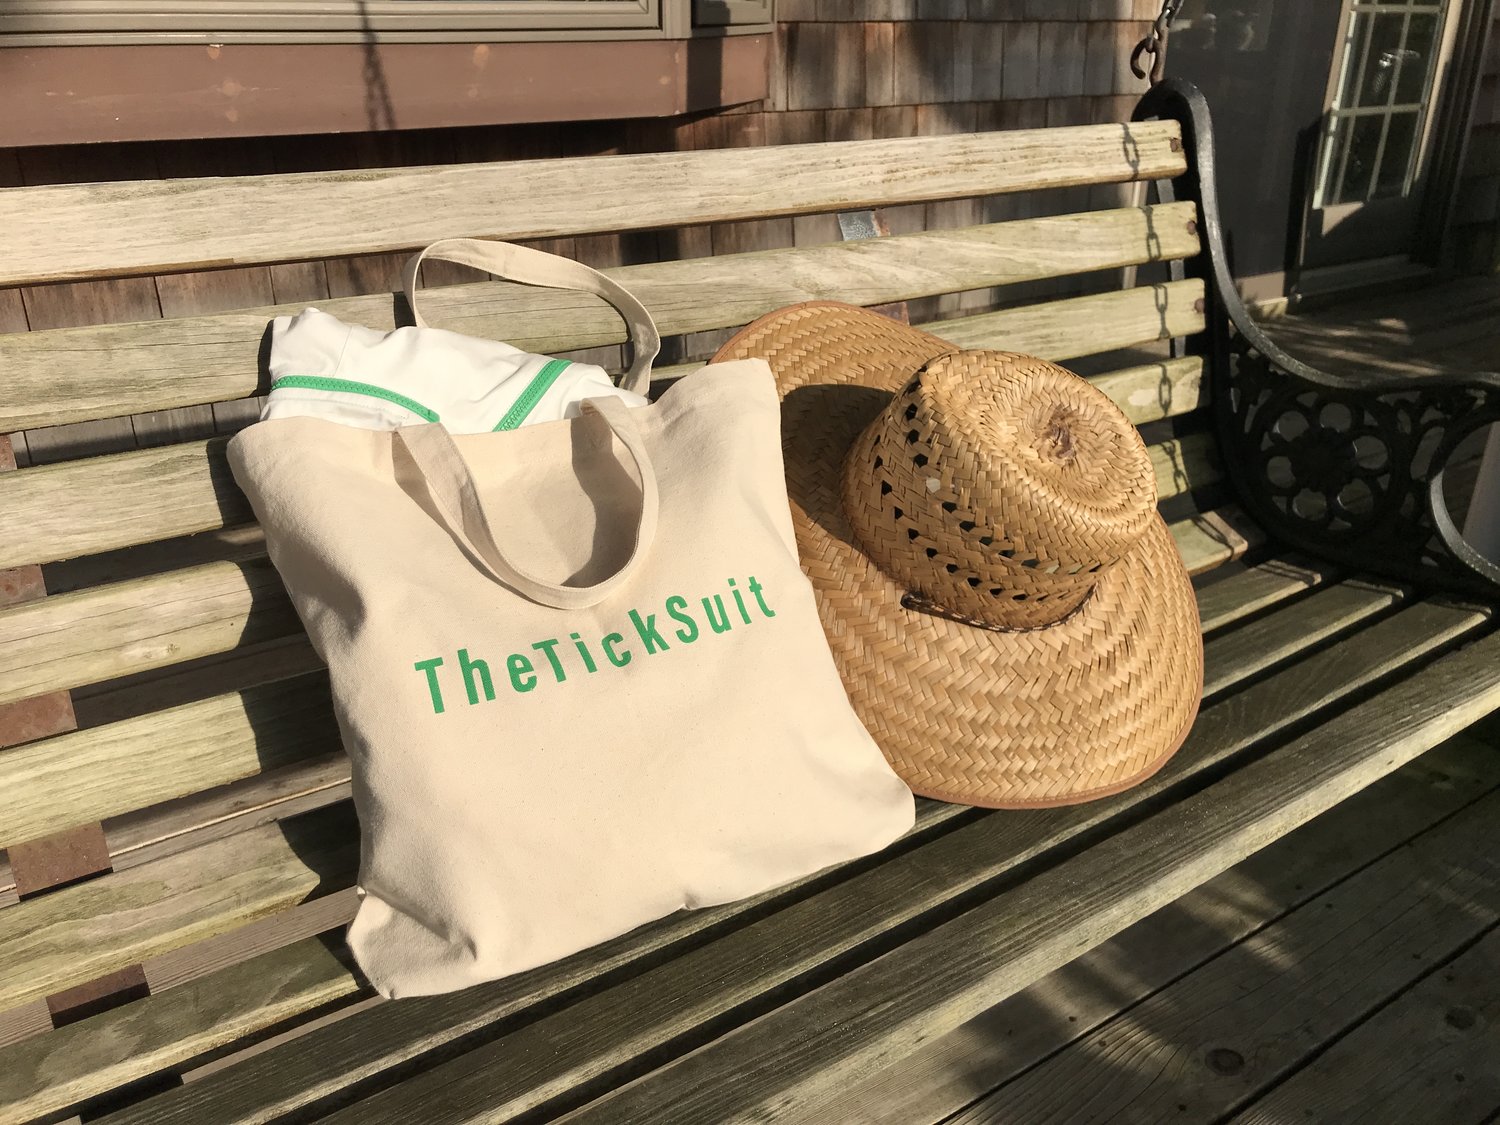 TheTickSuit inside a tote back with "TheTickSuit" logo on a bench next to a straw hat